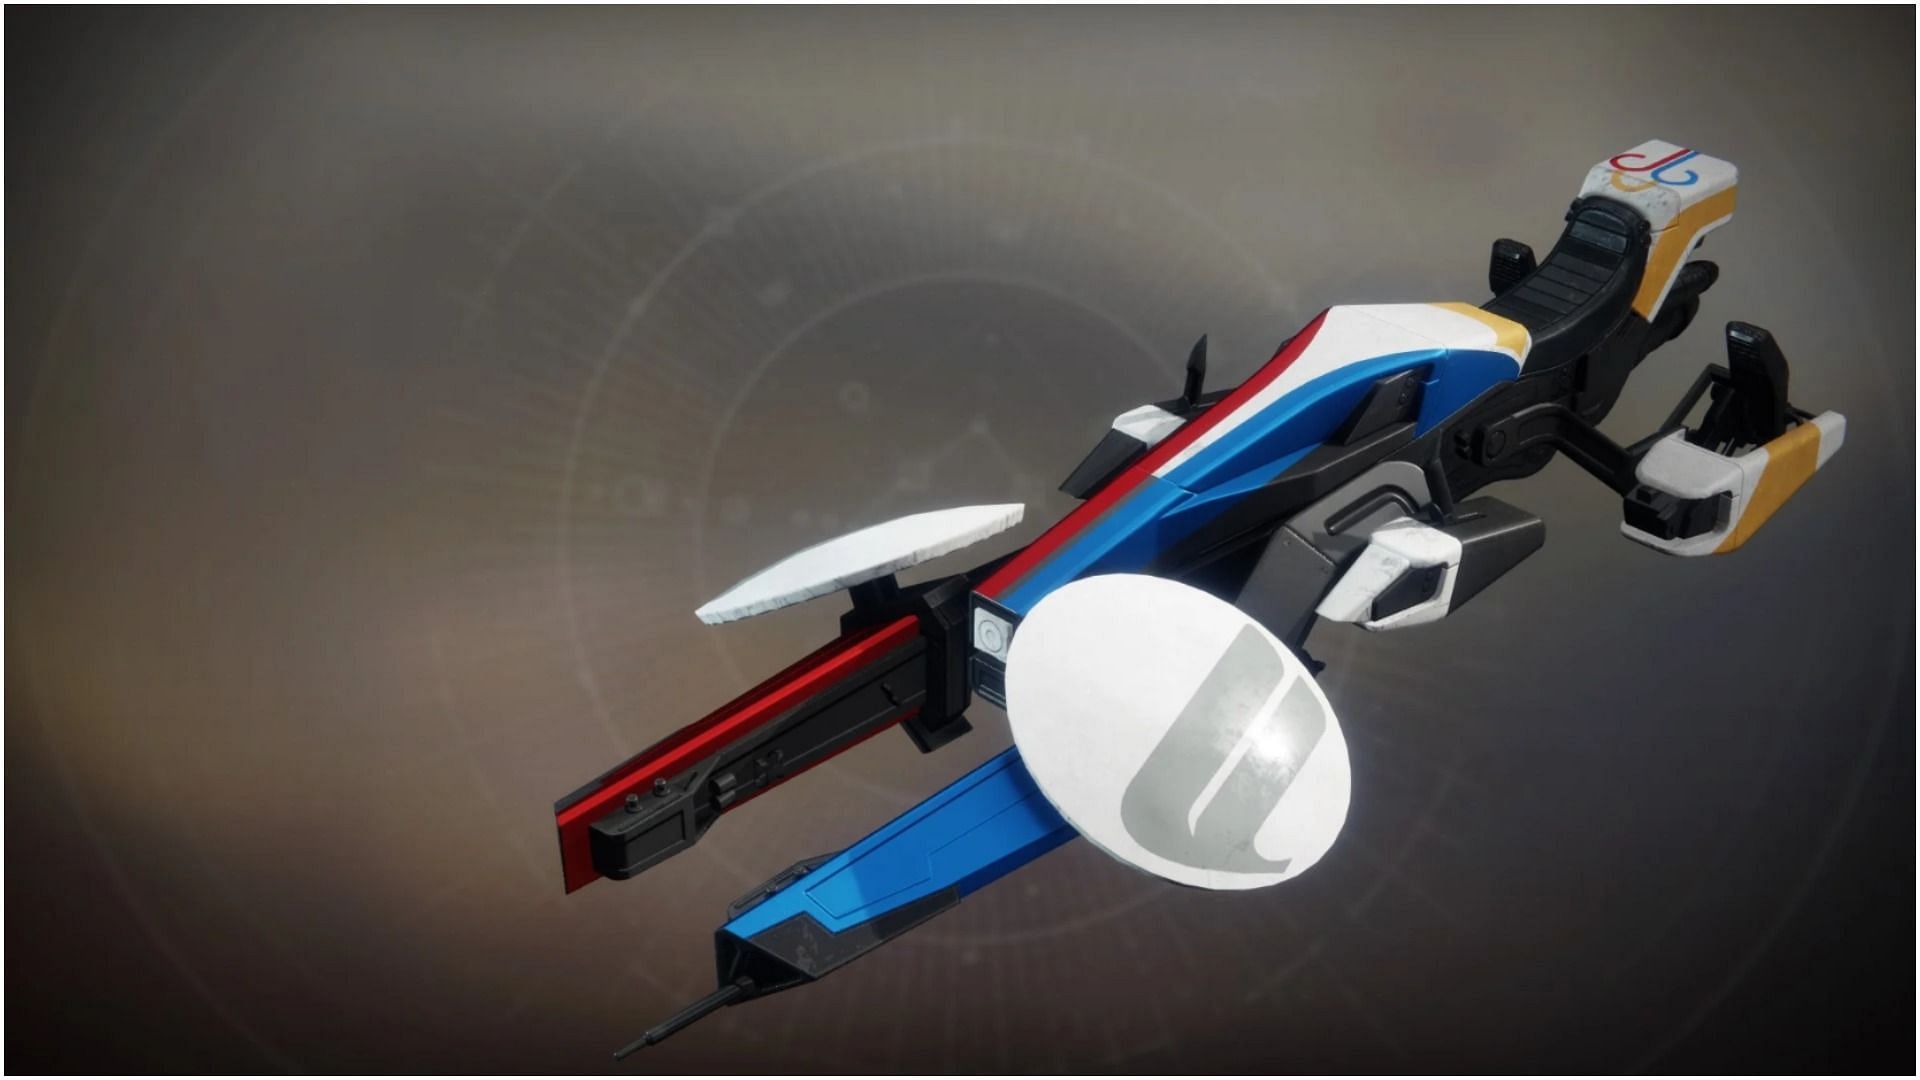 Upcoming Sparrow is known as Victory Lap for Guardian Games (Image via Destiny 2)